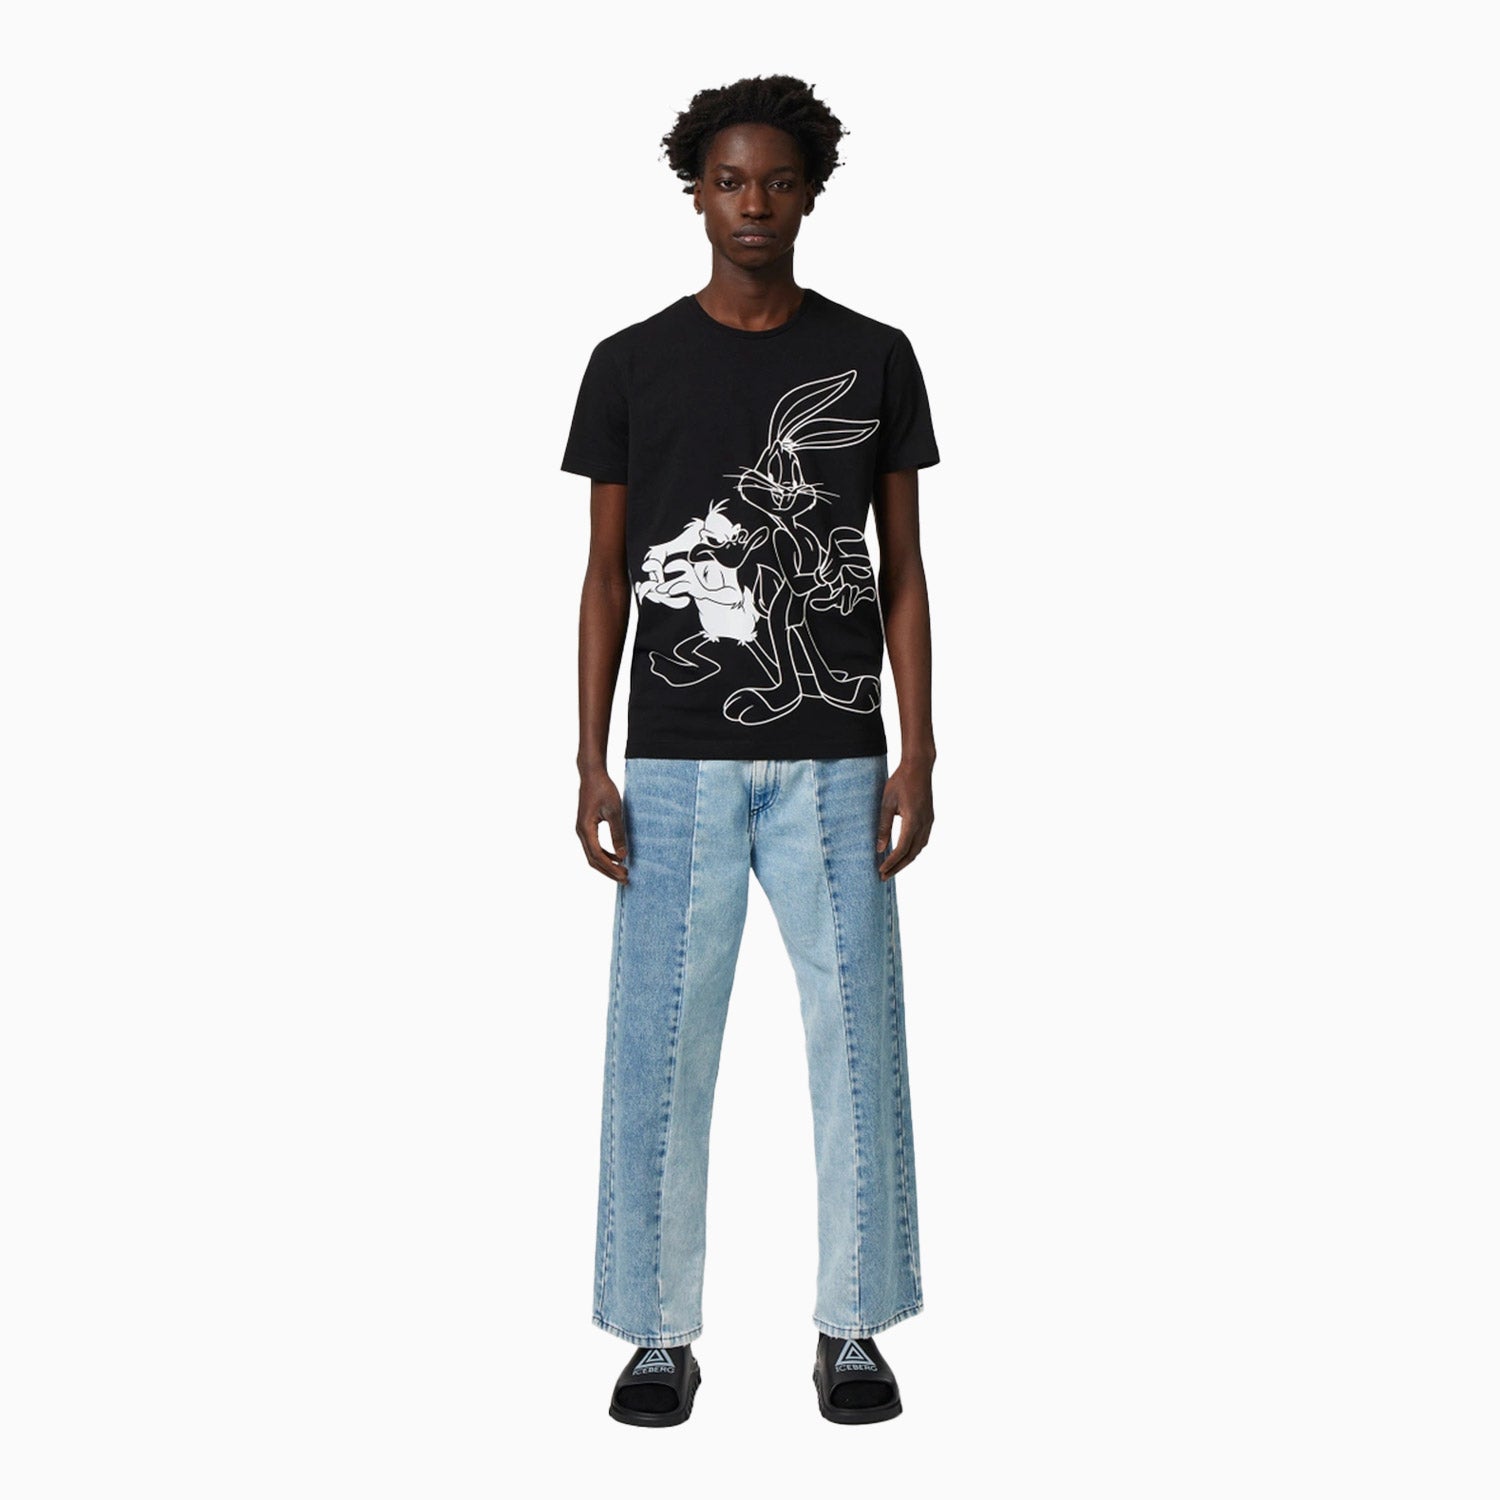 iceberg-mens-bugs-bunny-and-daffy-duck-t-shirt-f012-639a-9000